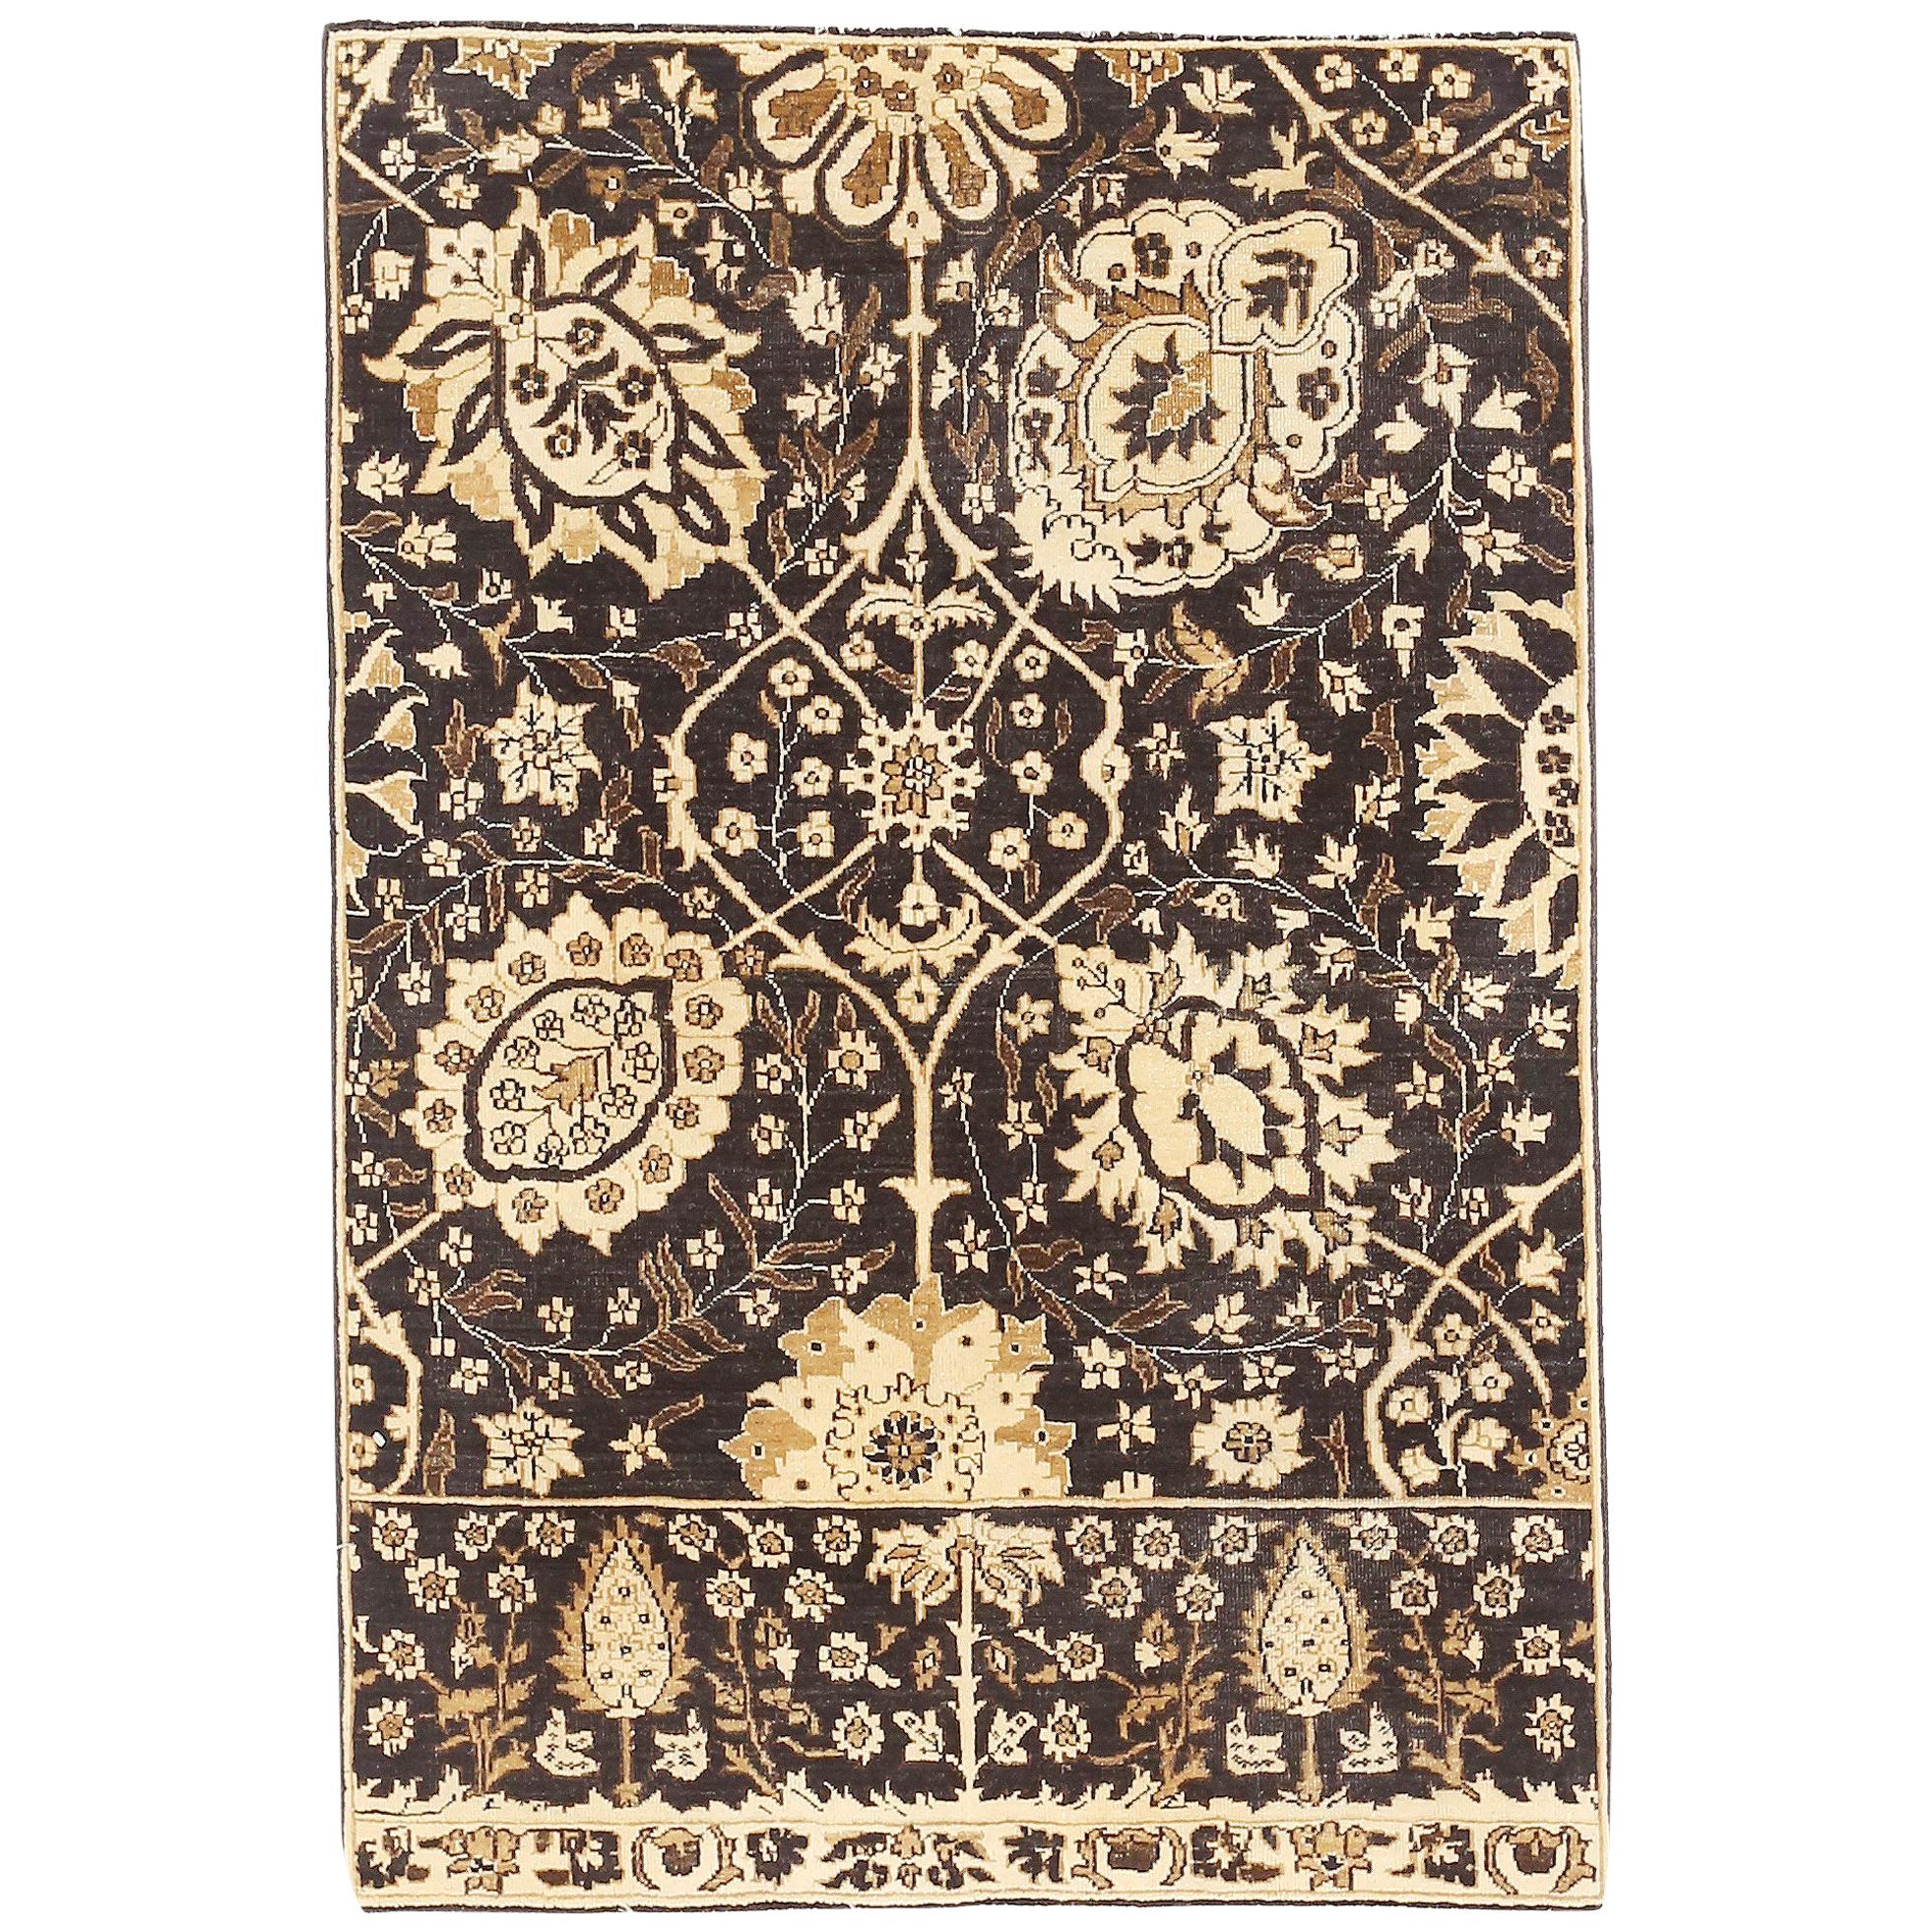 Contemporary Tabriz Rug with Black and Brown Flower Motifs on Ivory Field